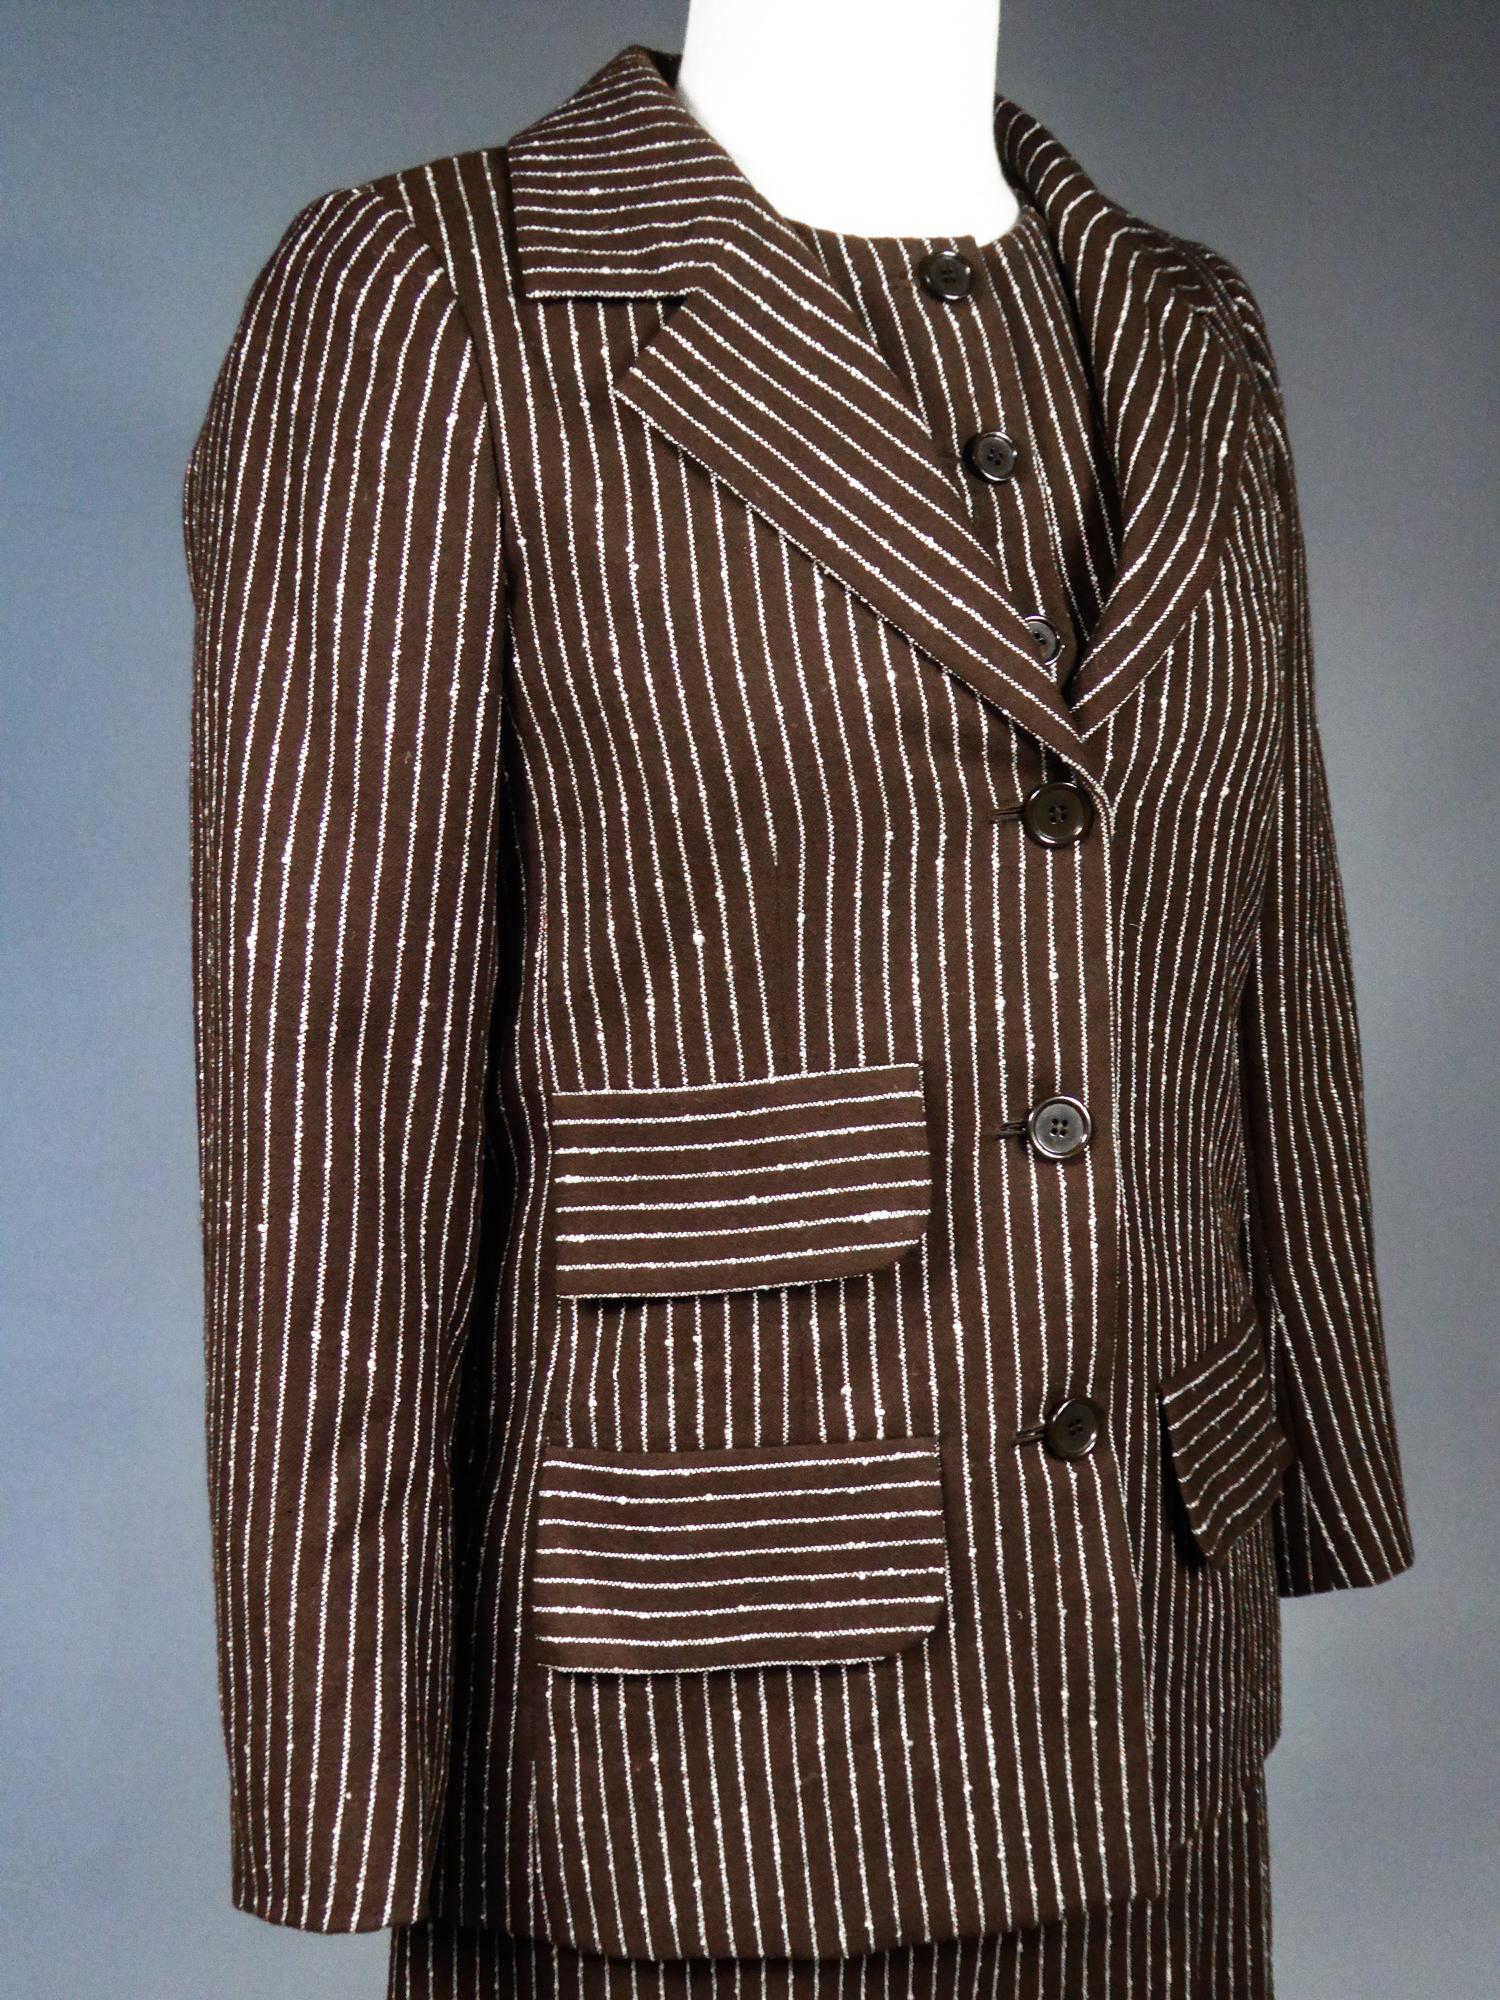 Yves Saint Laurent Haute Couture skirt-suit numbered 14539 Circa 1967/1970 For Sale 3